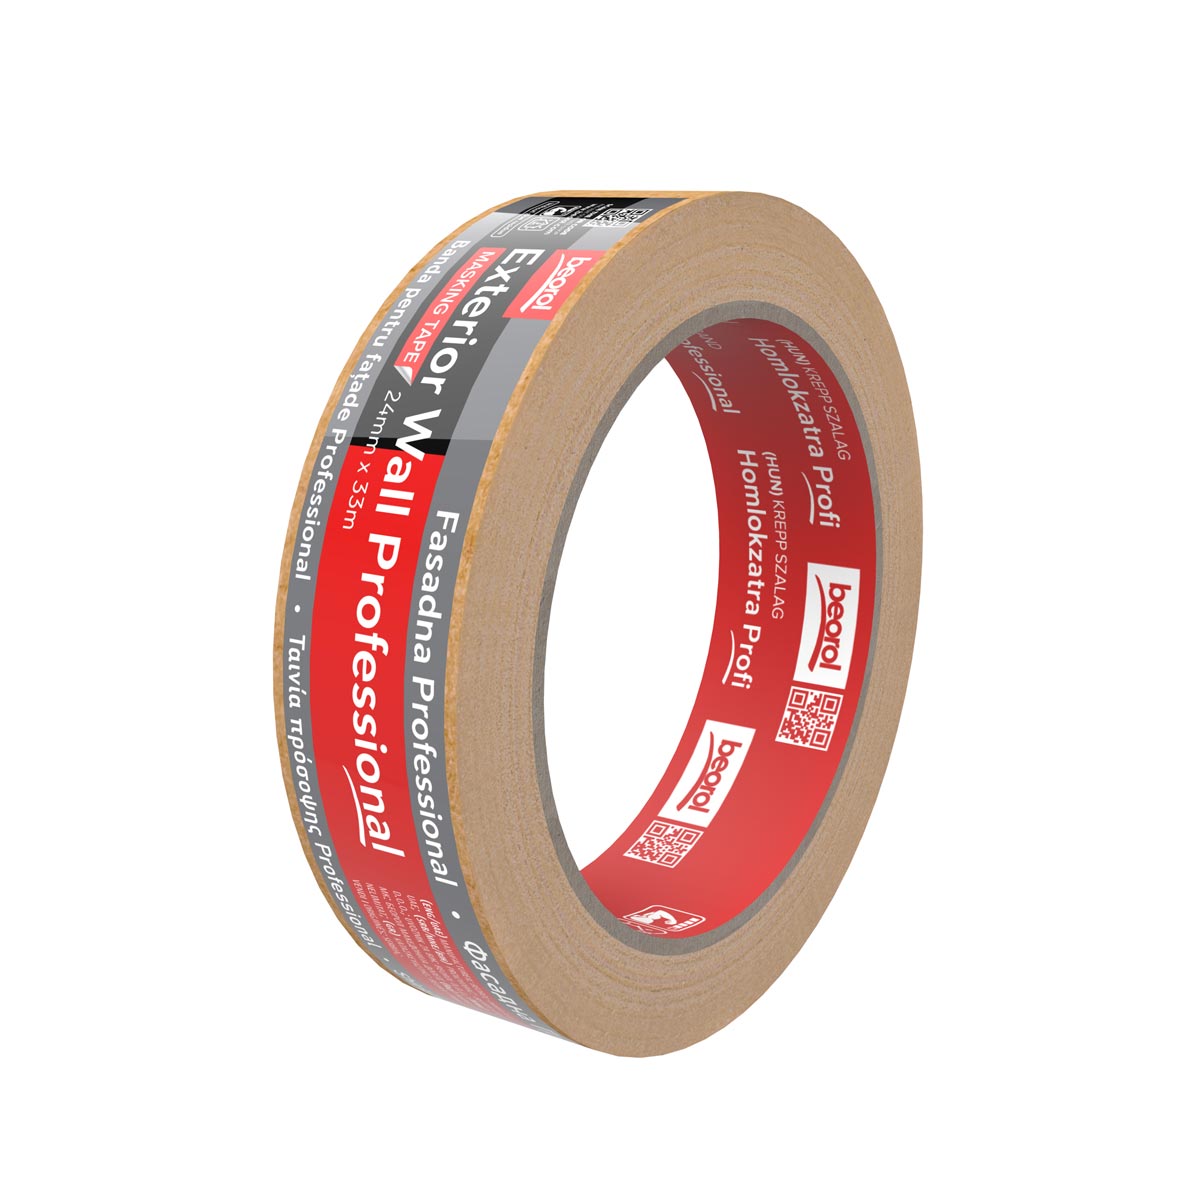 Masking tape Exterior Wall Professional 24mm x 33m 